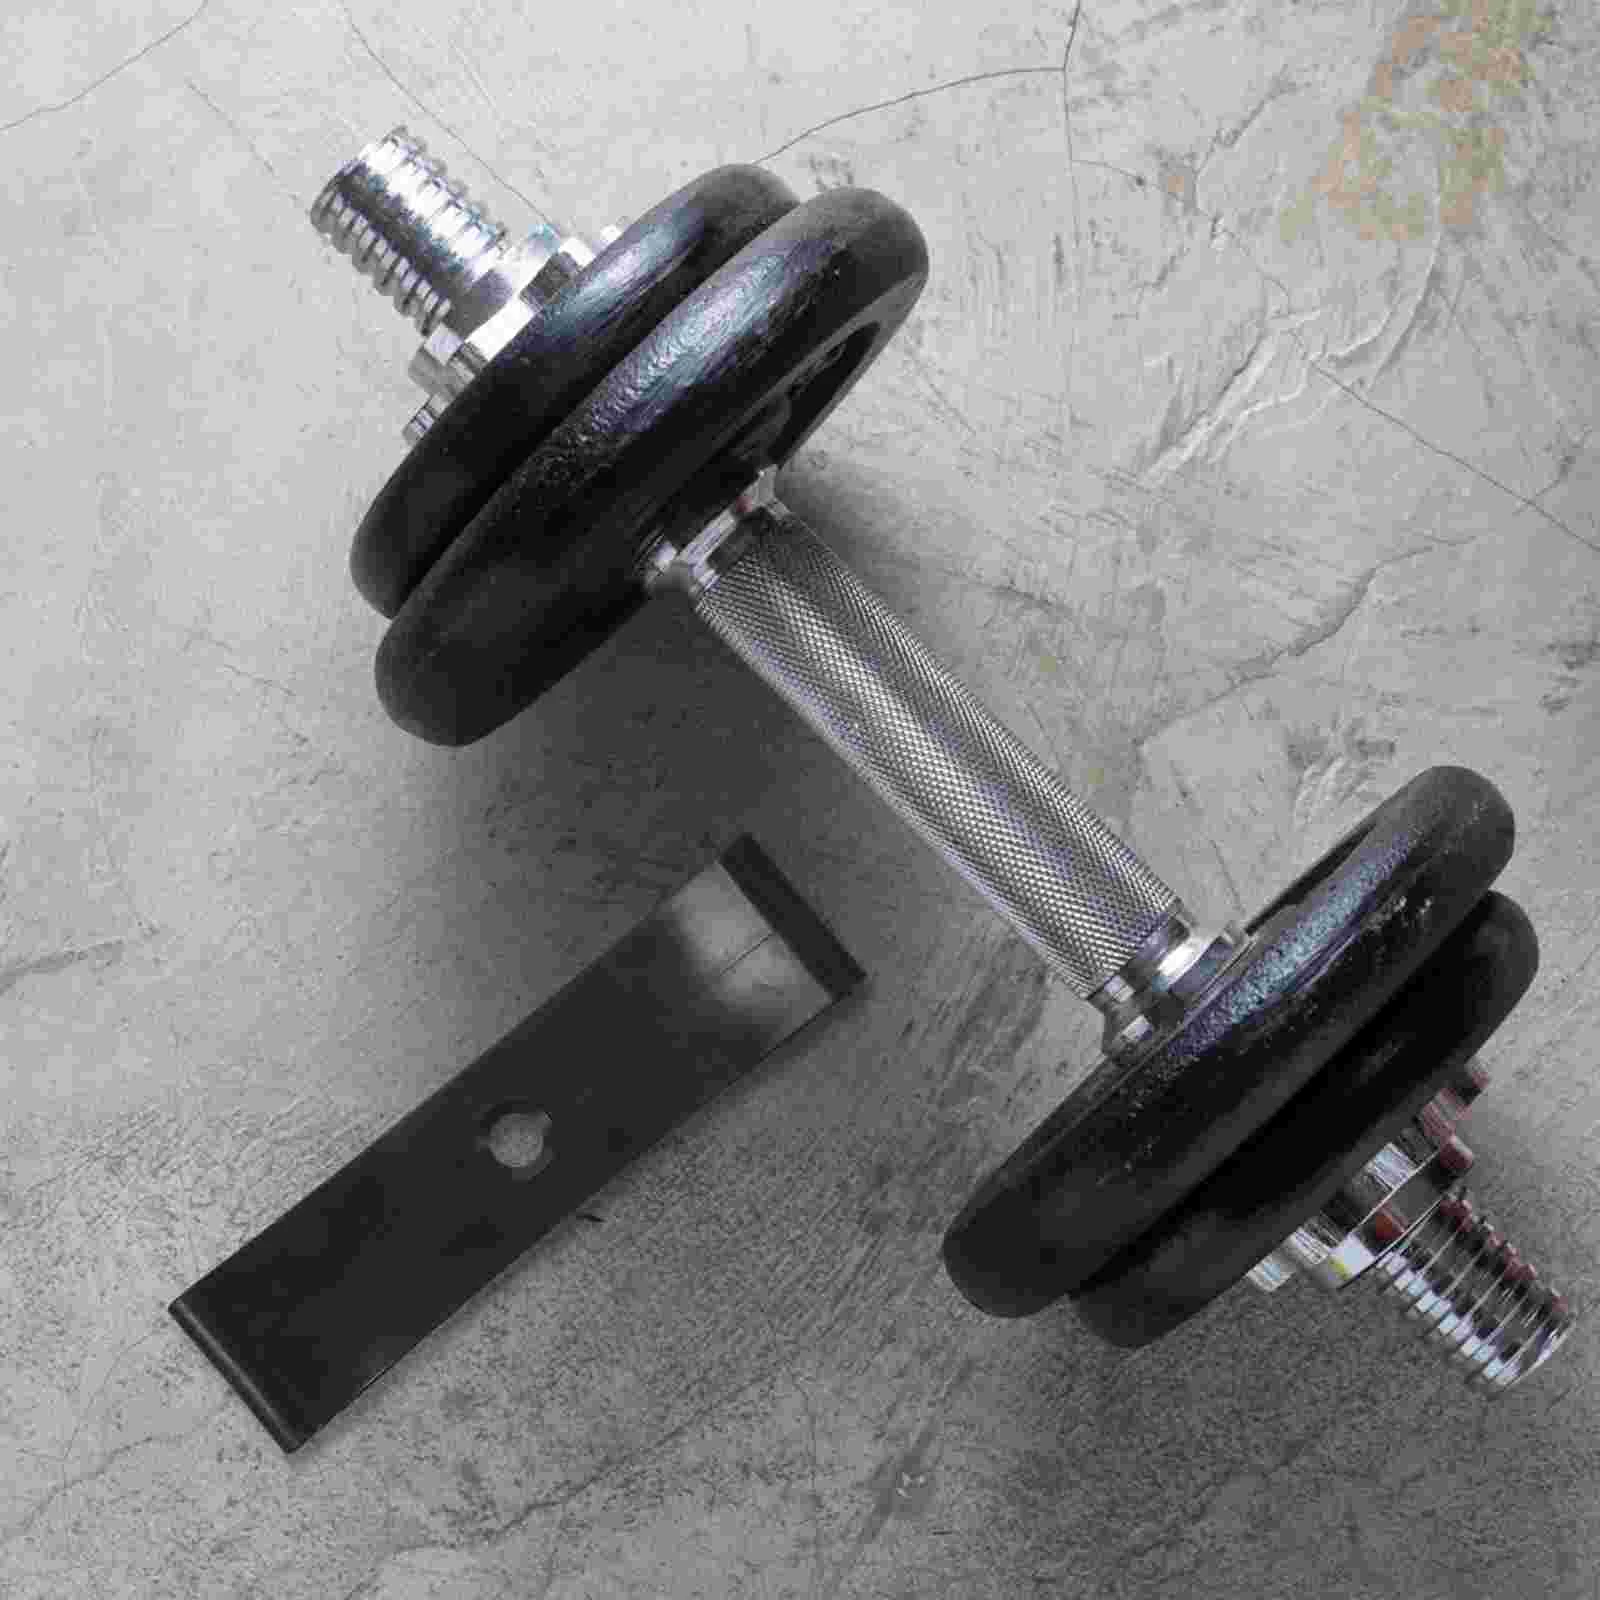 

Dumbbell Saddles Replacement Holder Fitness Tool Plastic Cradles Equipment Rack Stable Dumbbell Stand for Home and Gym Use